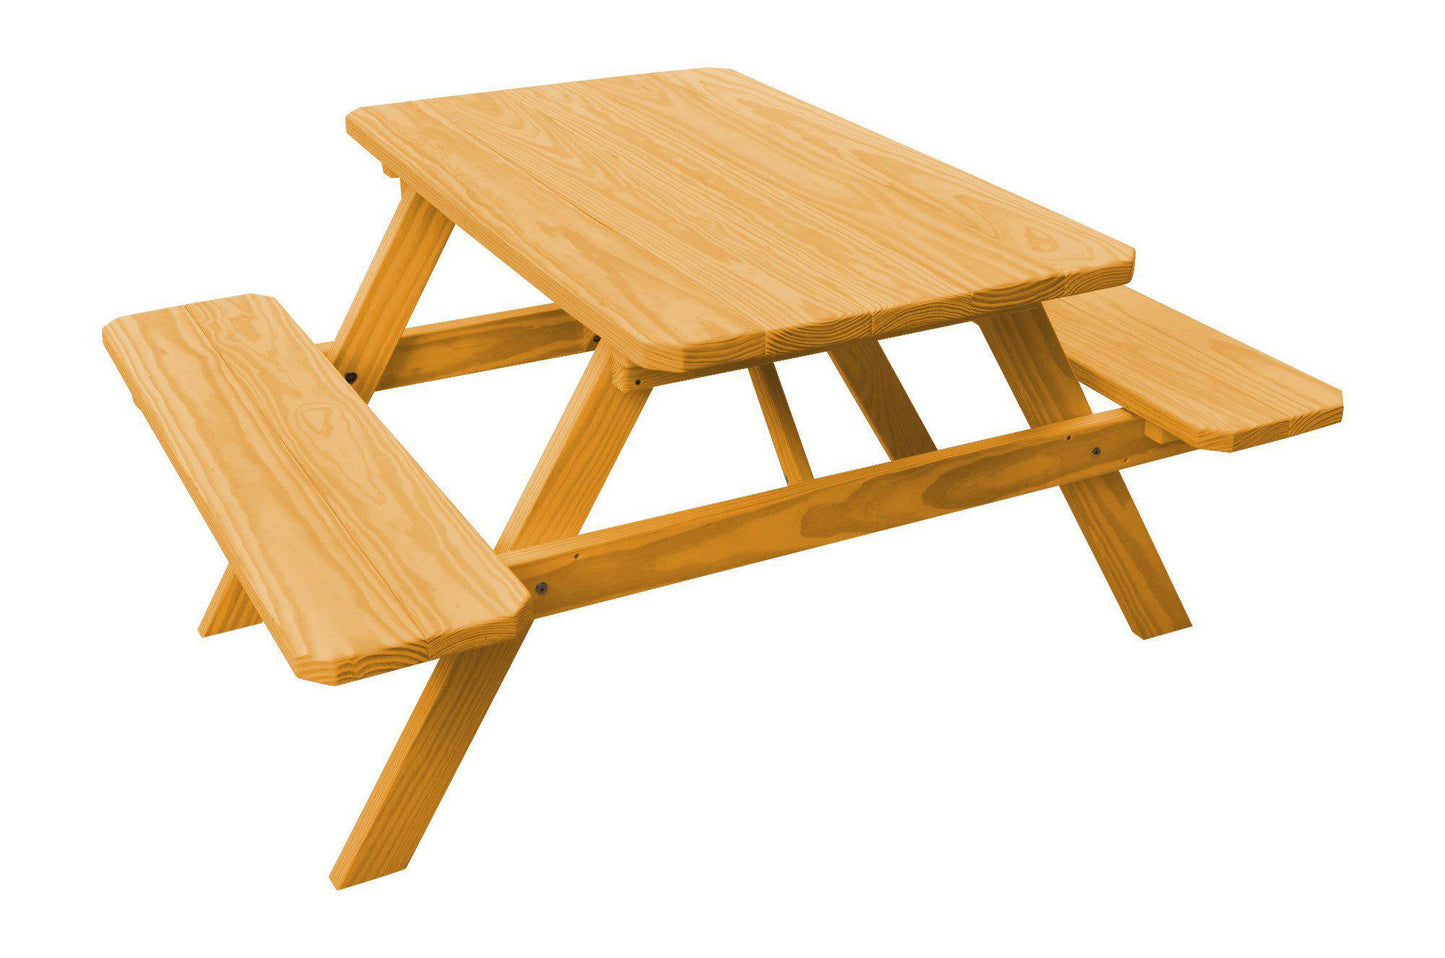 A&L Furniture Co. Pressure Treated Pine 4' Picnic Table w/ Attached Benches  - LEAD TIME TO SHIP 10 BUSINESS DAYS